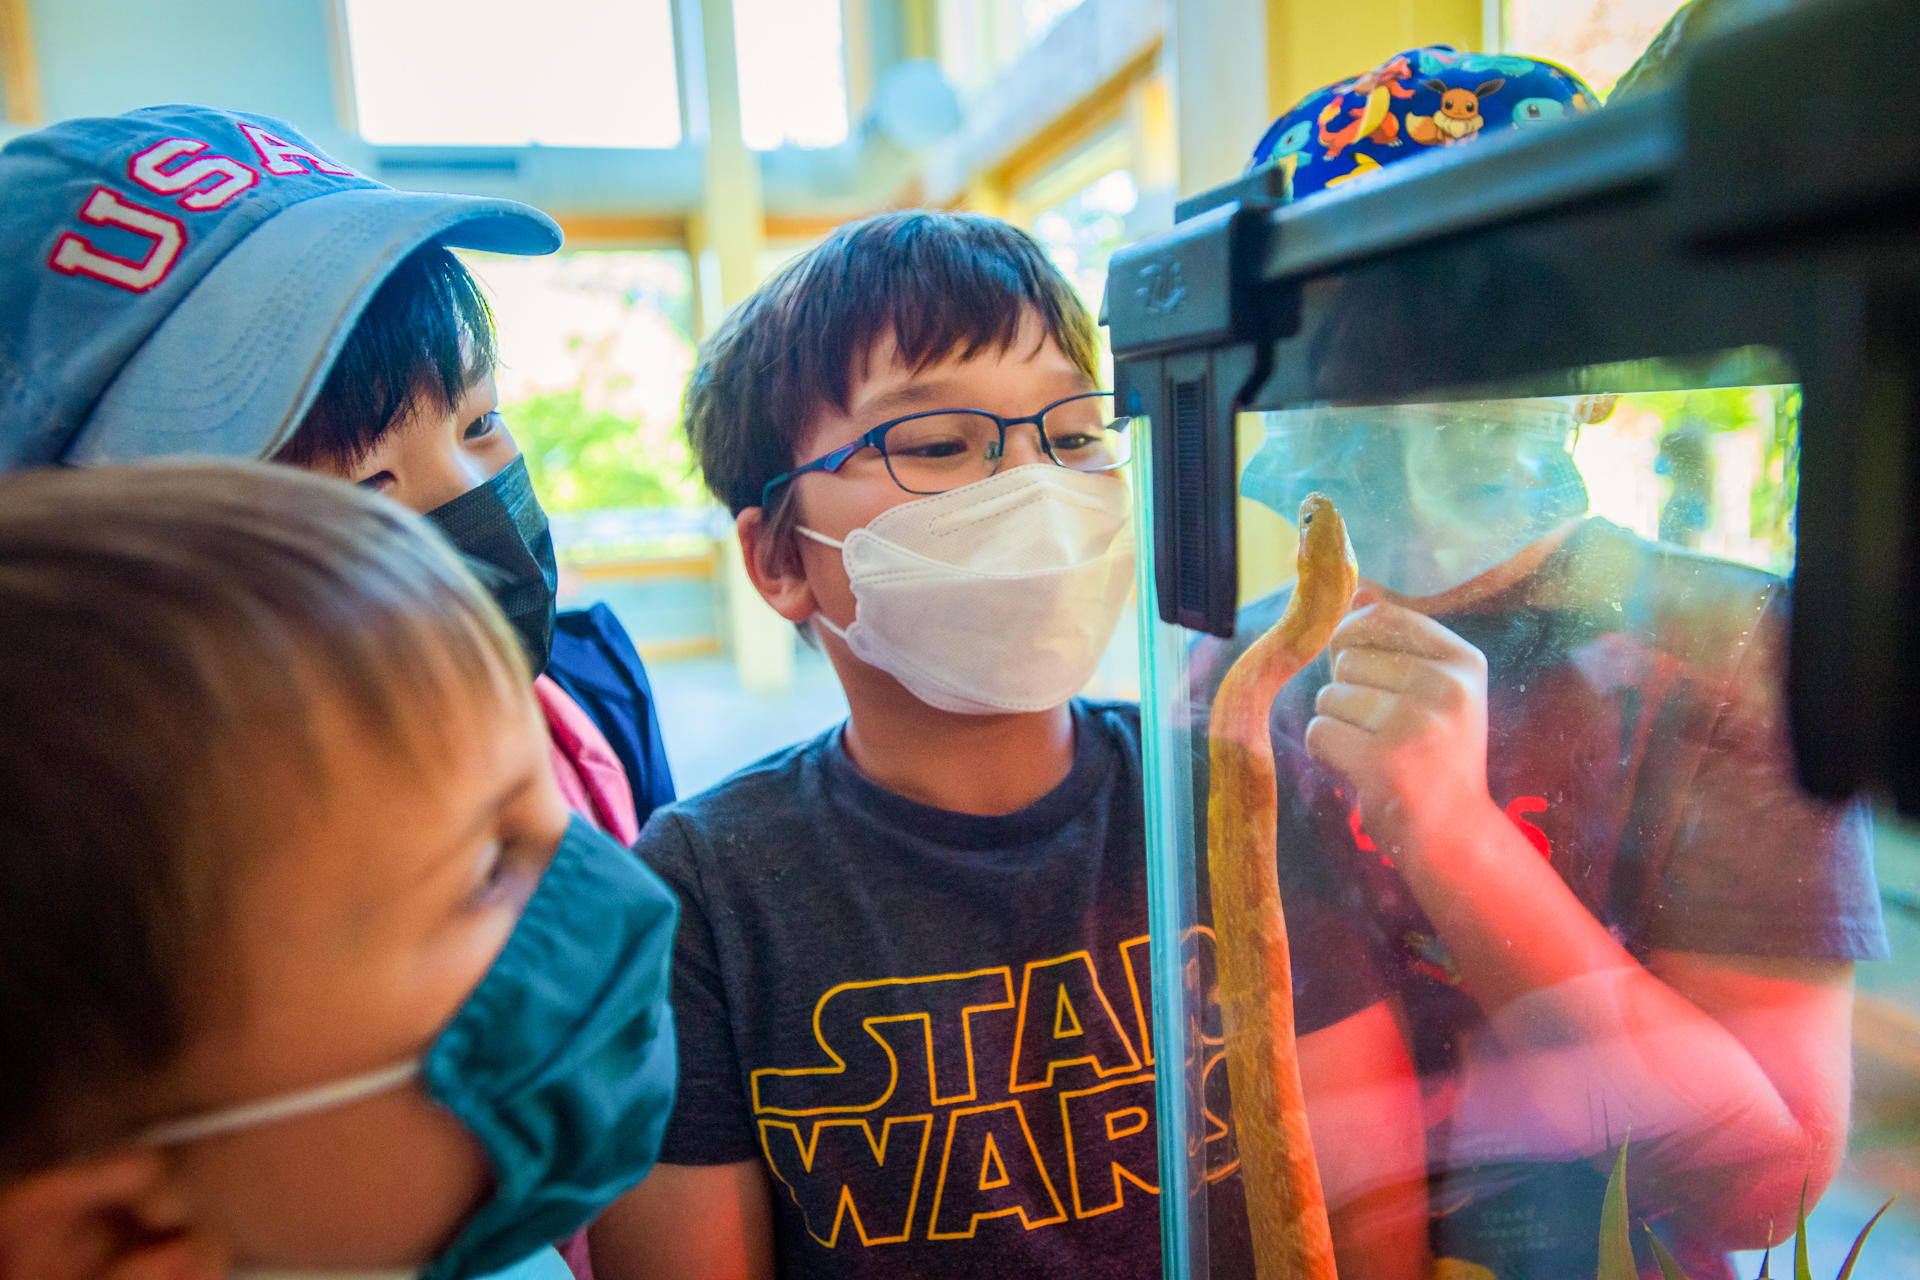 Campers at Boston Nature Center Camp wearing face masks get an up-close look at Sammy the Snake as it stretches up the inside of its glass enclosure